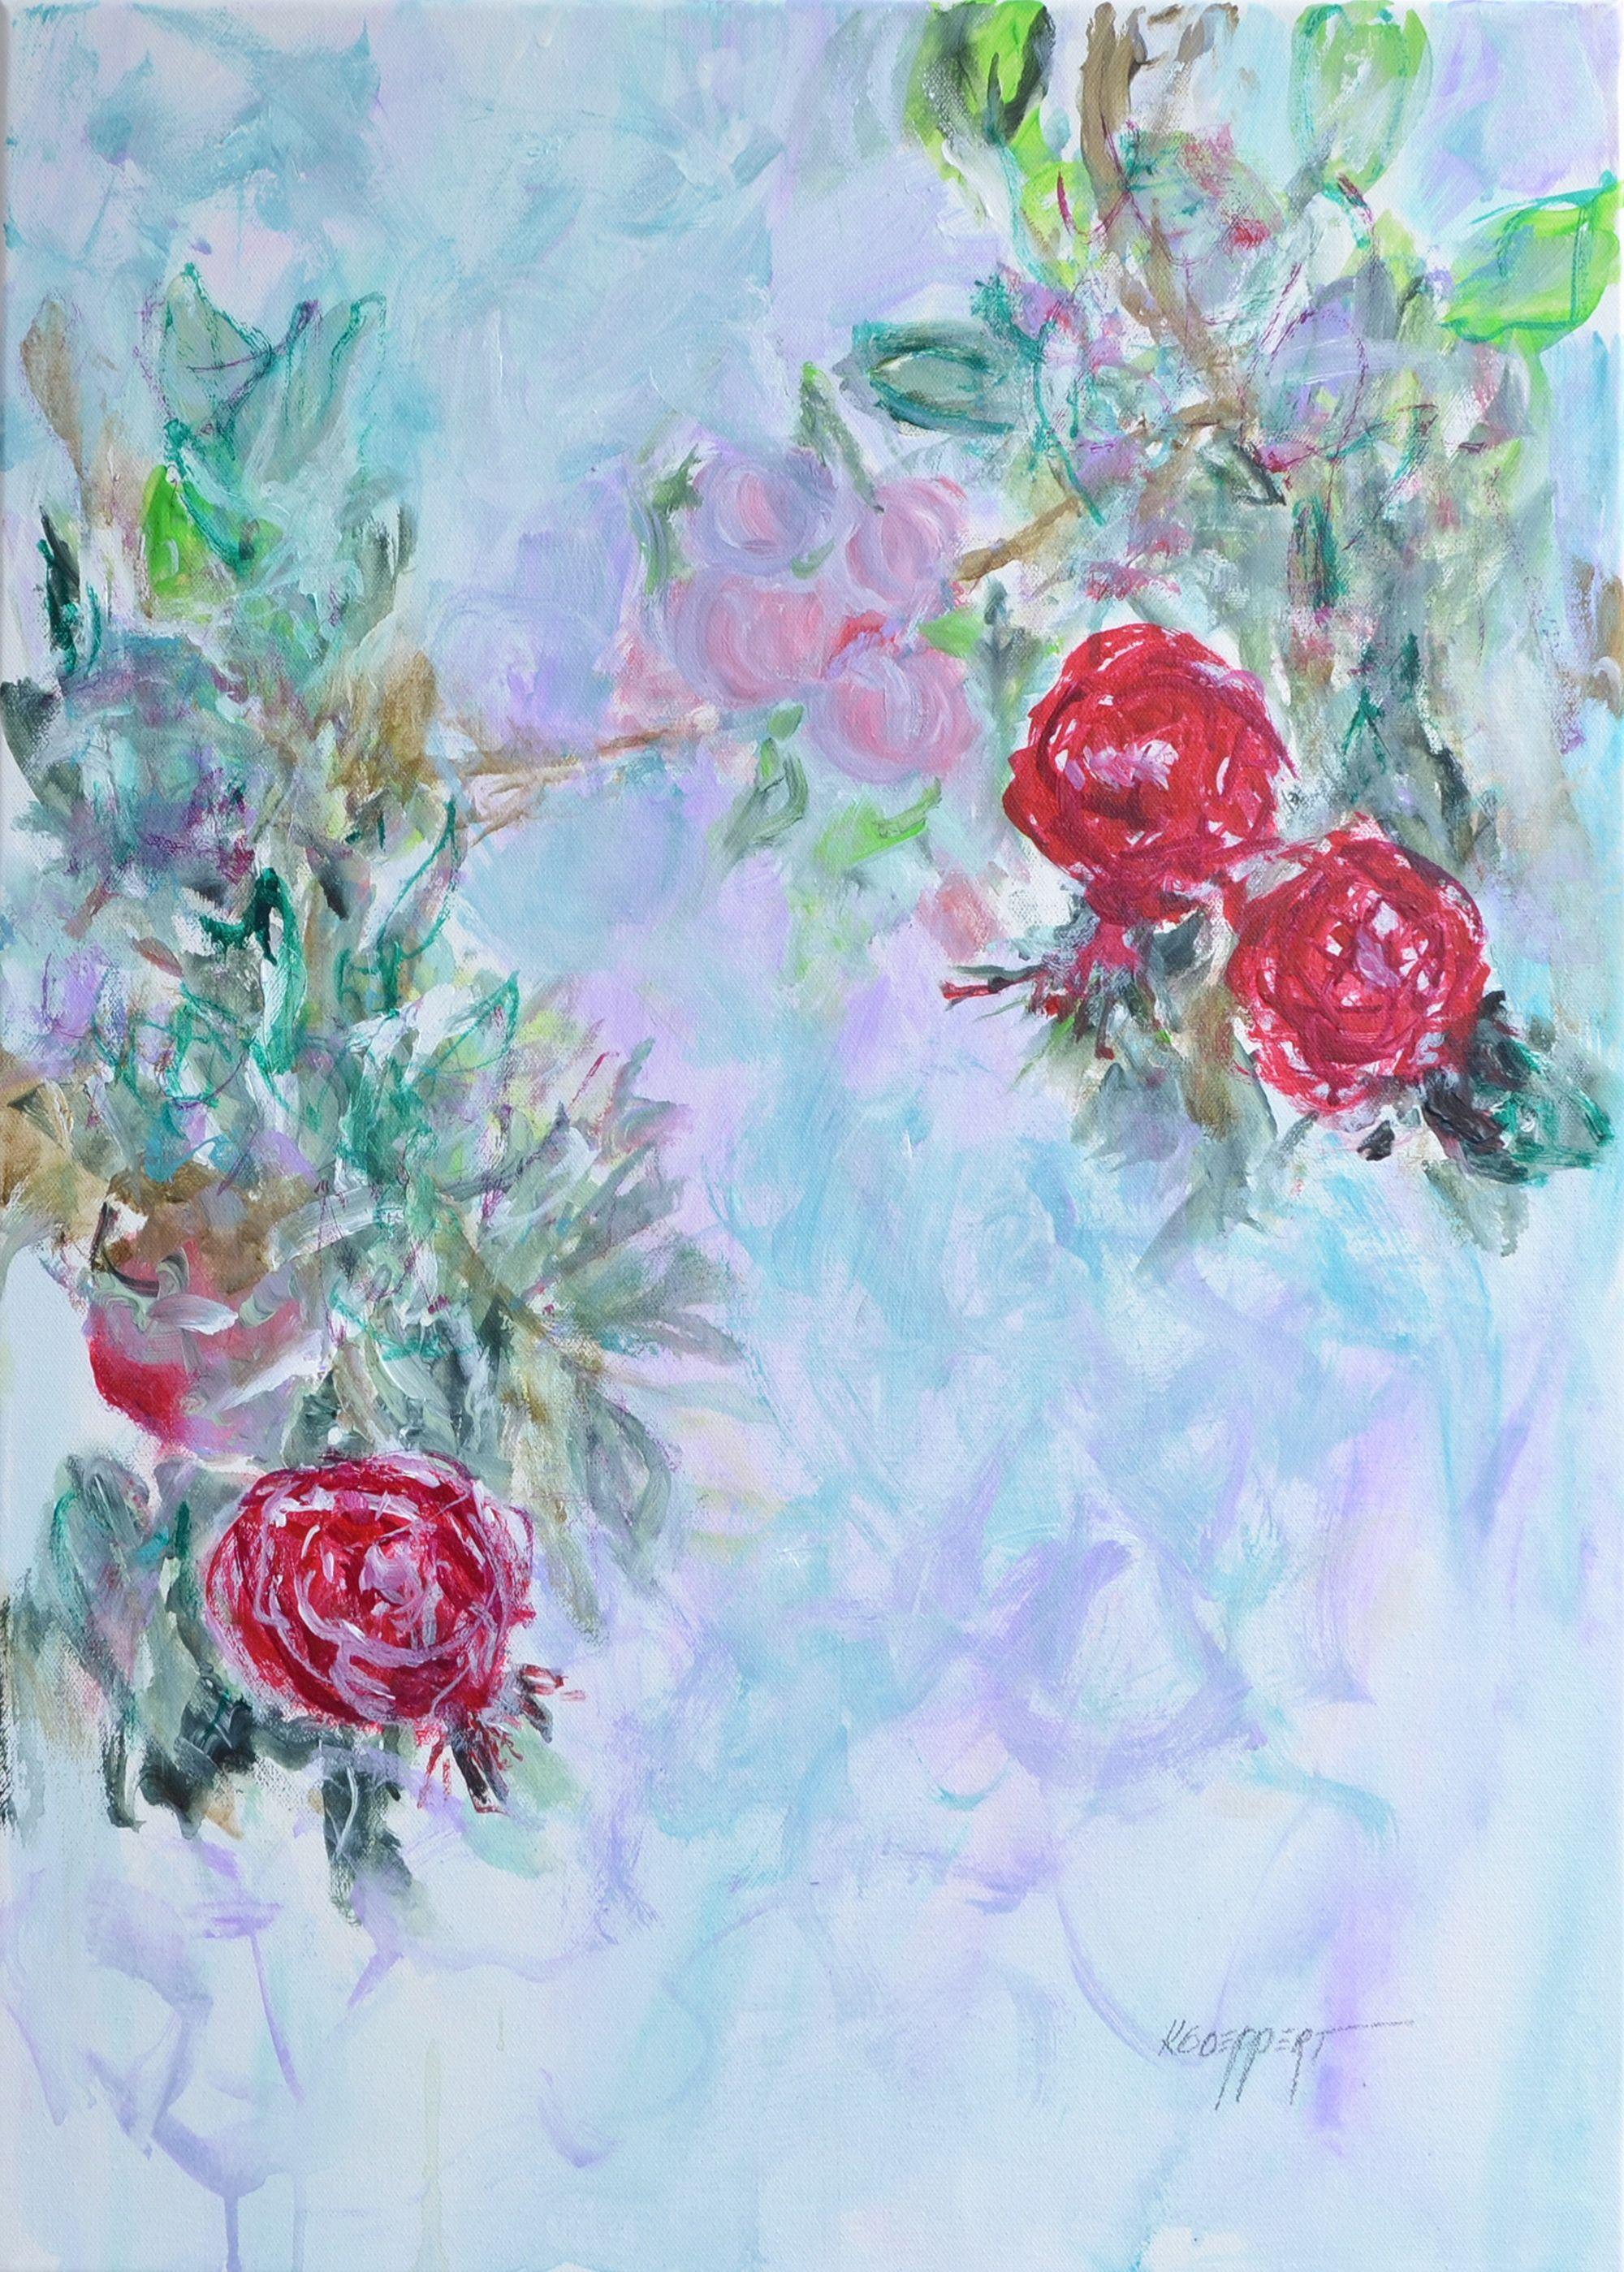 "China Rose" is a small floral painting on canvas.    I have been looking at a lot of classical Chinese paintings lately which influences my present paintings.  The work is sealed with a glossy varnish, the sides of the gallery wrapped canvas are